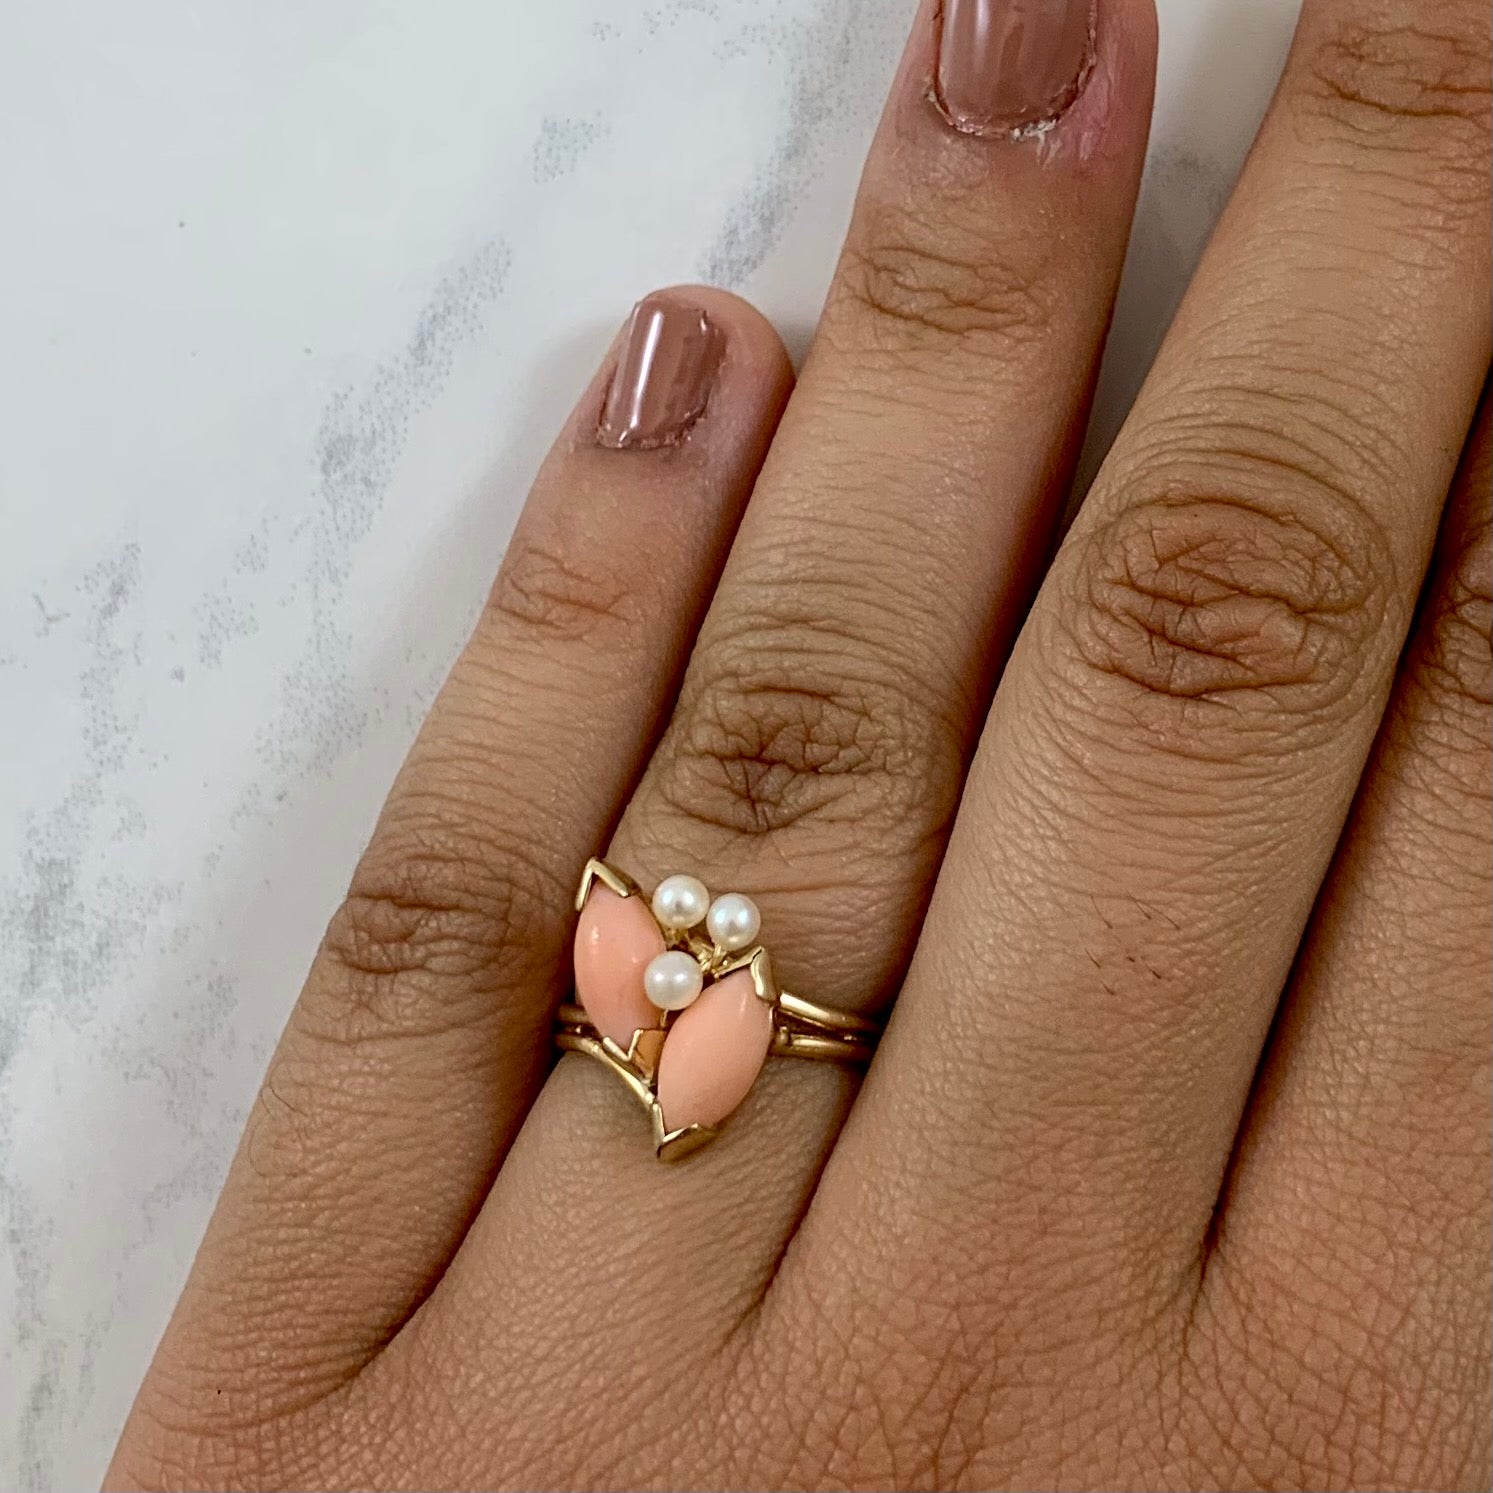 Marquise Coral Cabochon & Pearl Ring | 1.10ctw, 0.45ctw | SZ 7 |